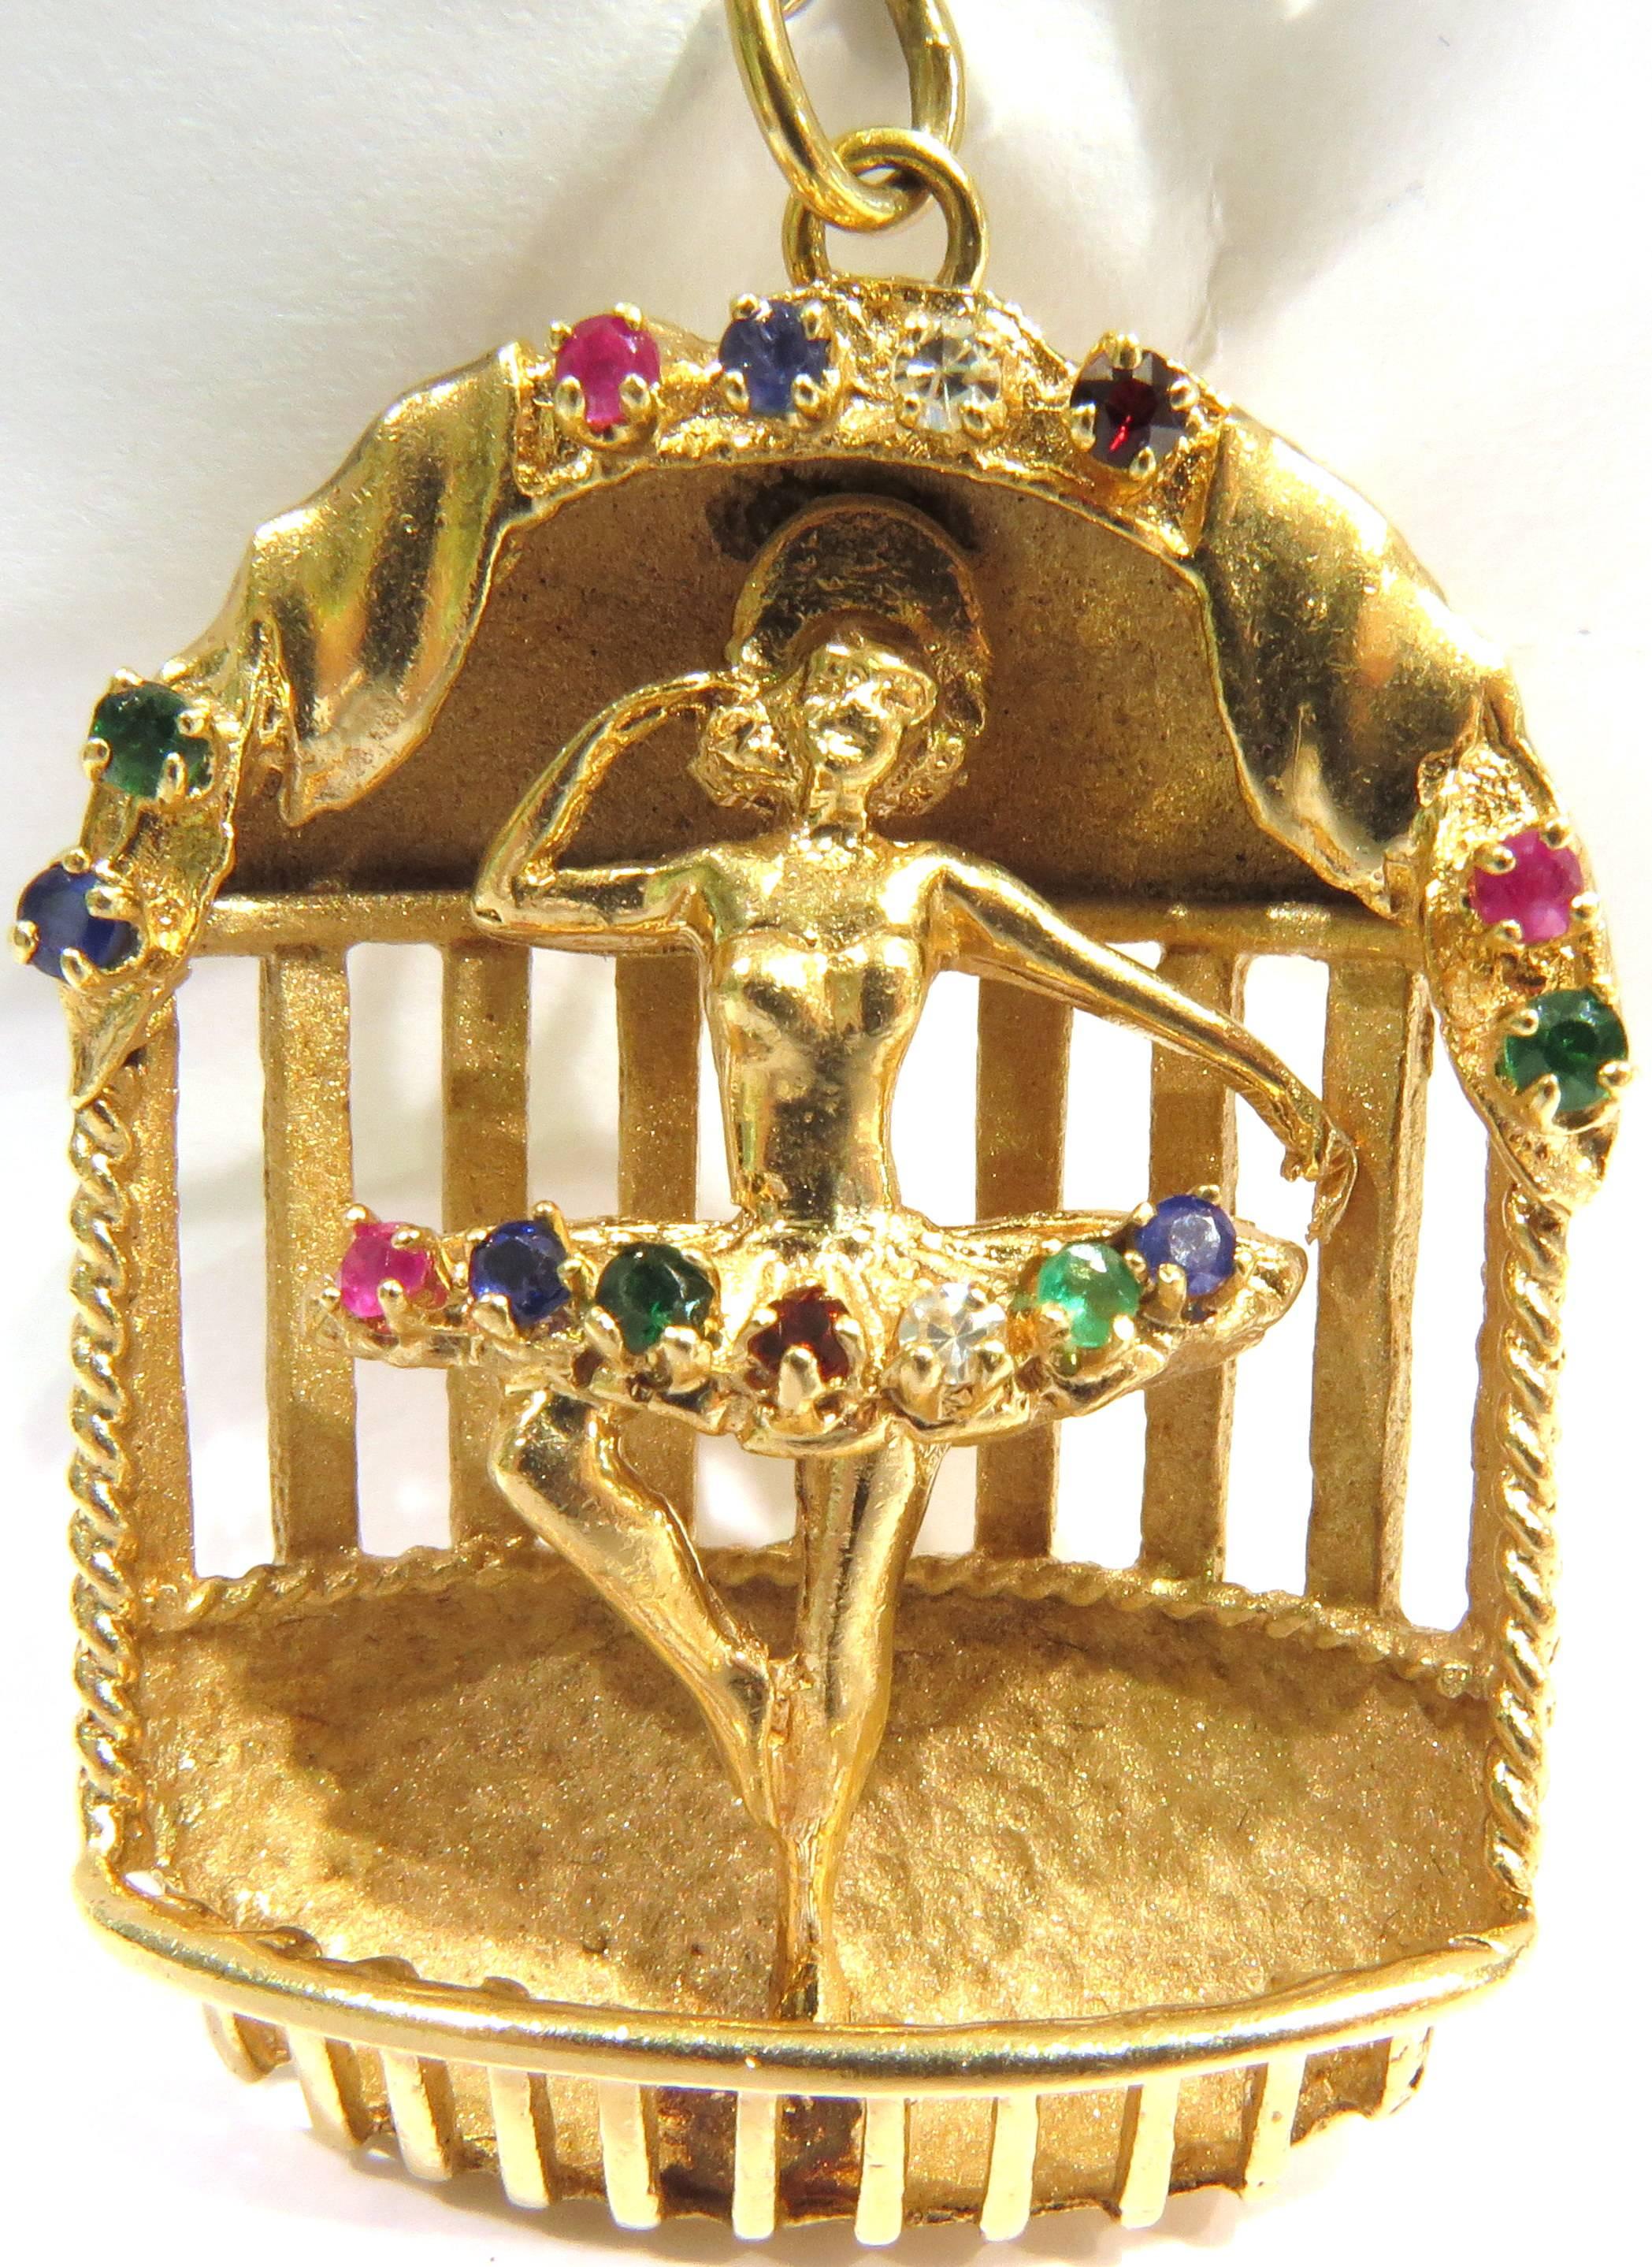 This ballerina charm is set in 14k yellow gold with diamonds rubies sapphires emeralds garnets and green toumalines. This graceful ballerina seems to be on stage.
This charm weighs 17.70 grams
This charm measures 1 9/16 inch high by 1 1/4 in across